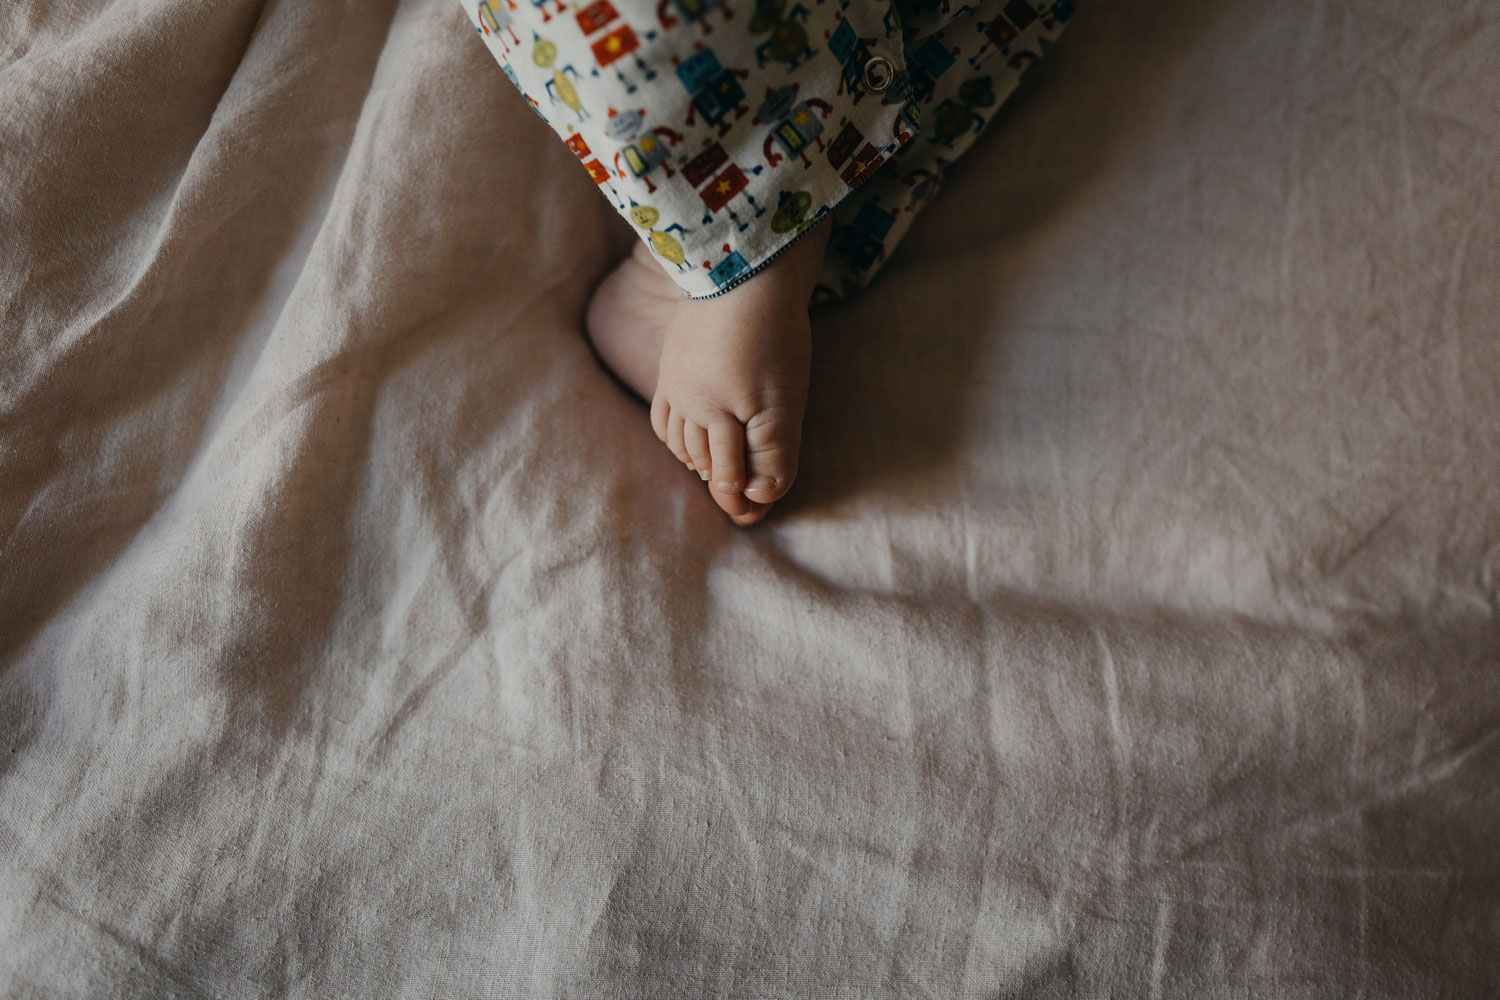 Image of a baby's chubby feet, captured during a professional baby photoshoot in Copenhagen